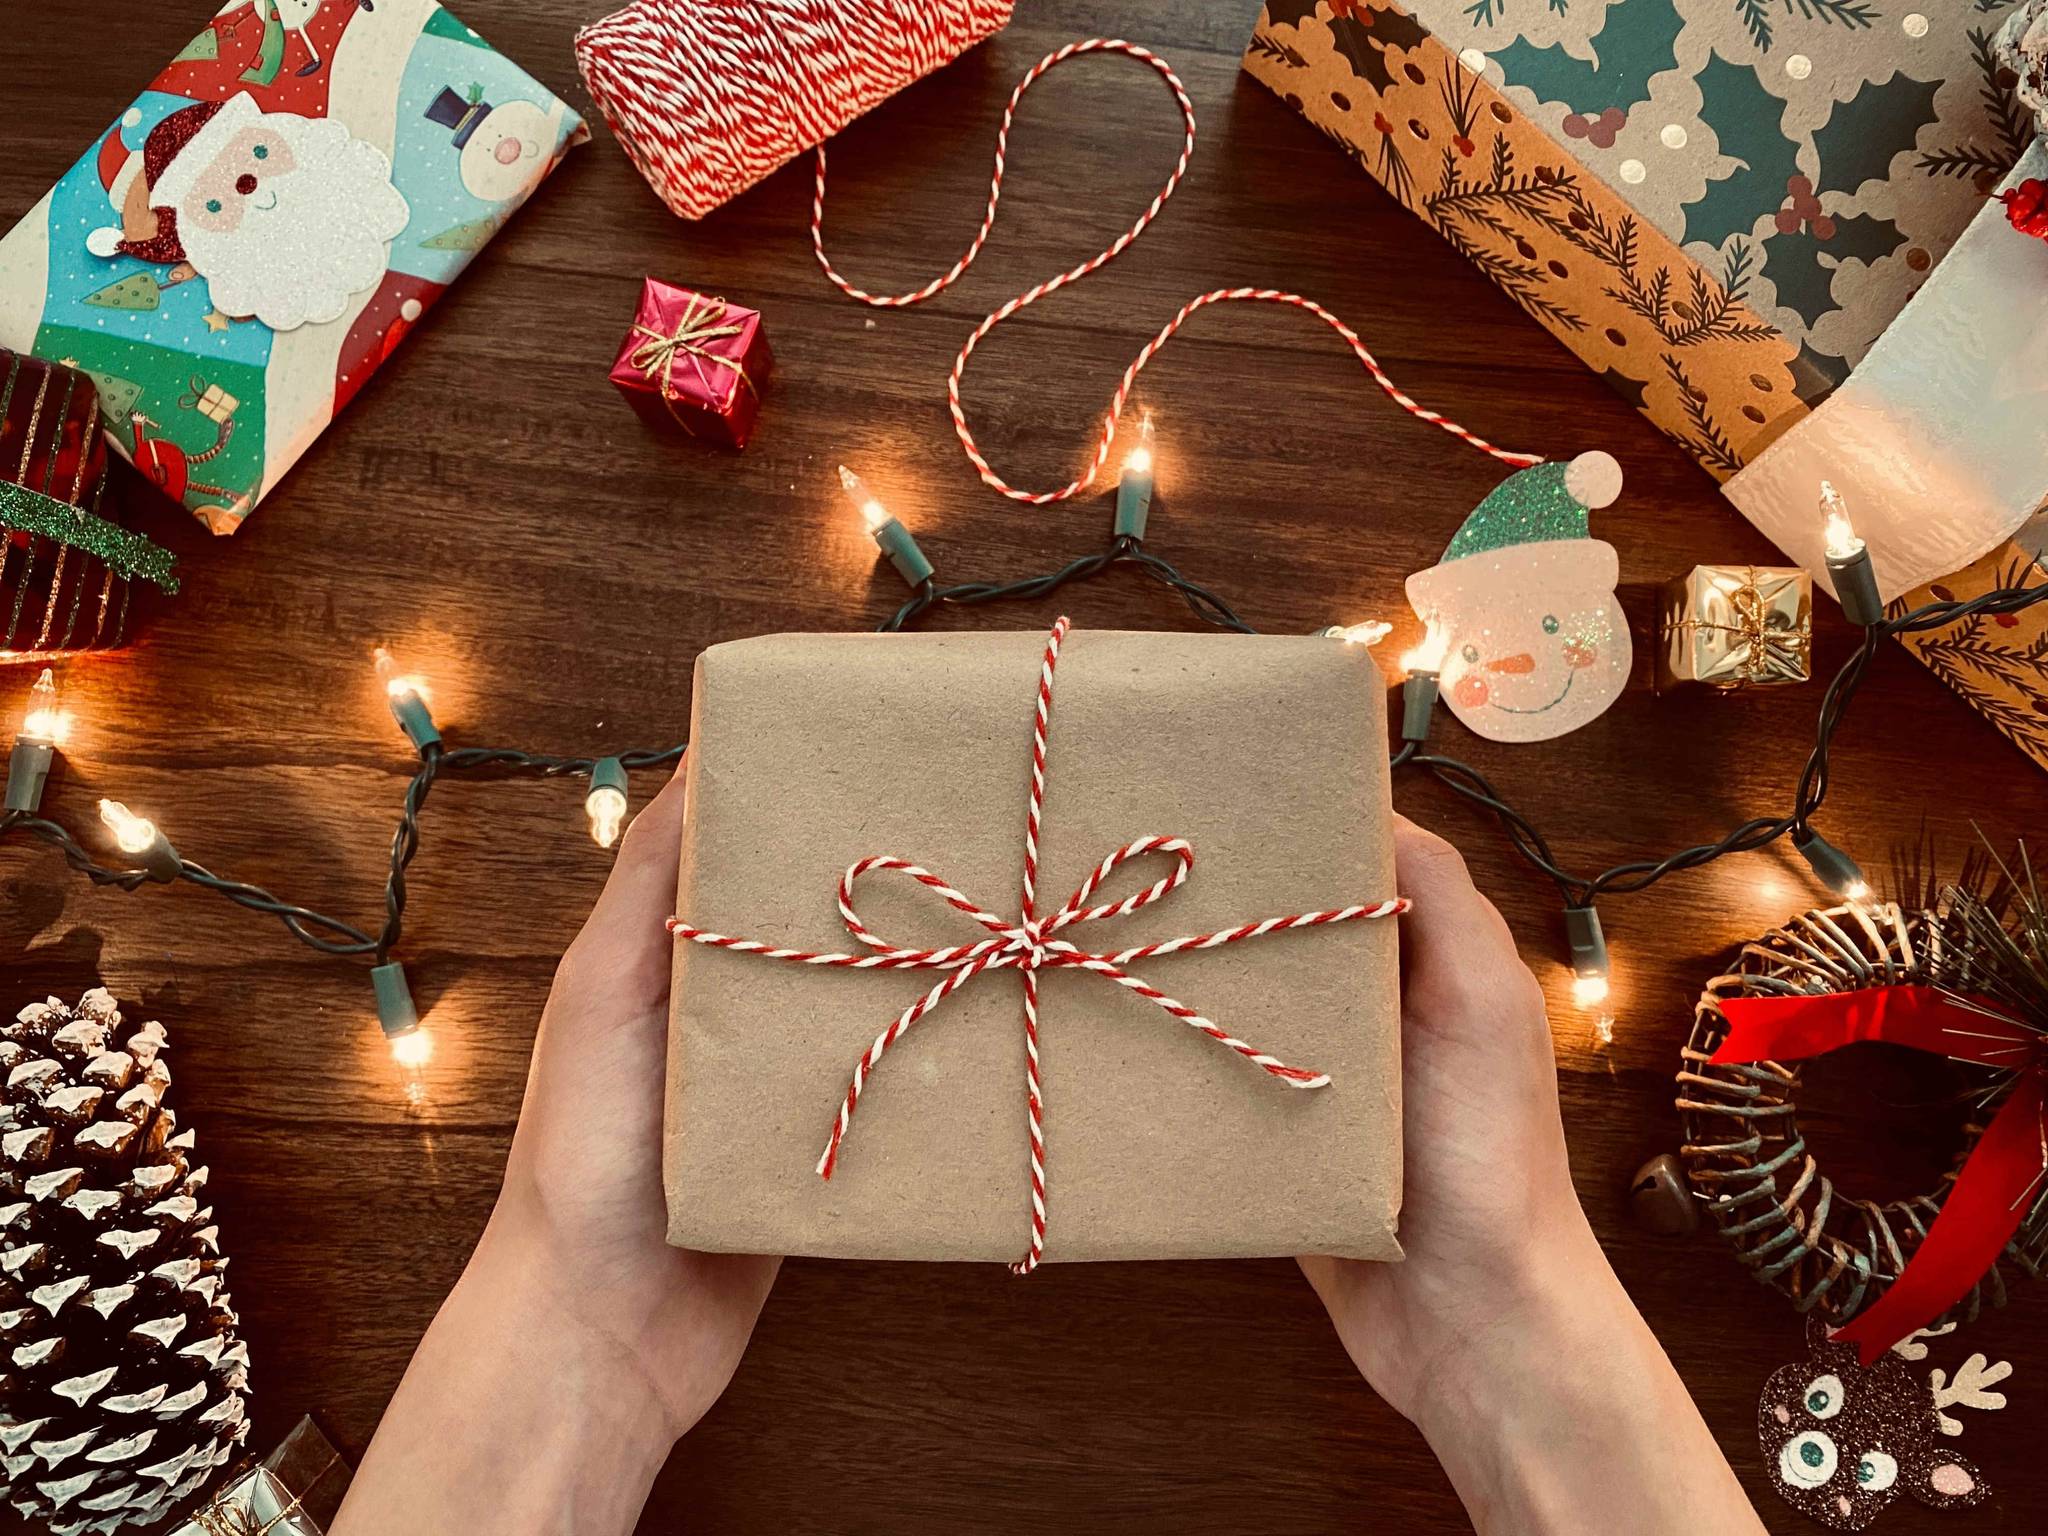 Americans feel competitive over holiday gift-giving